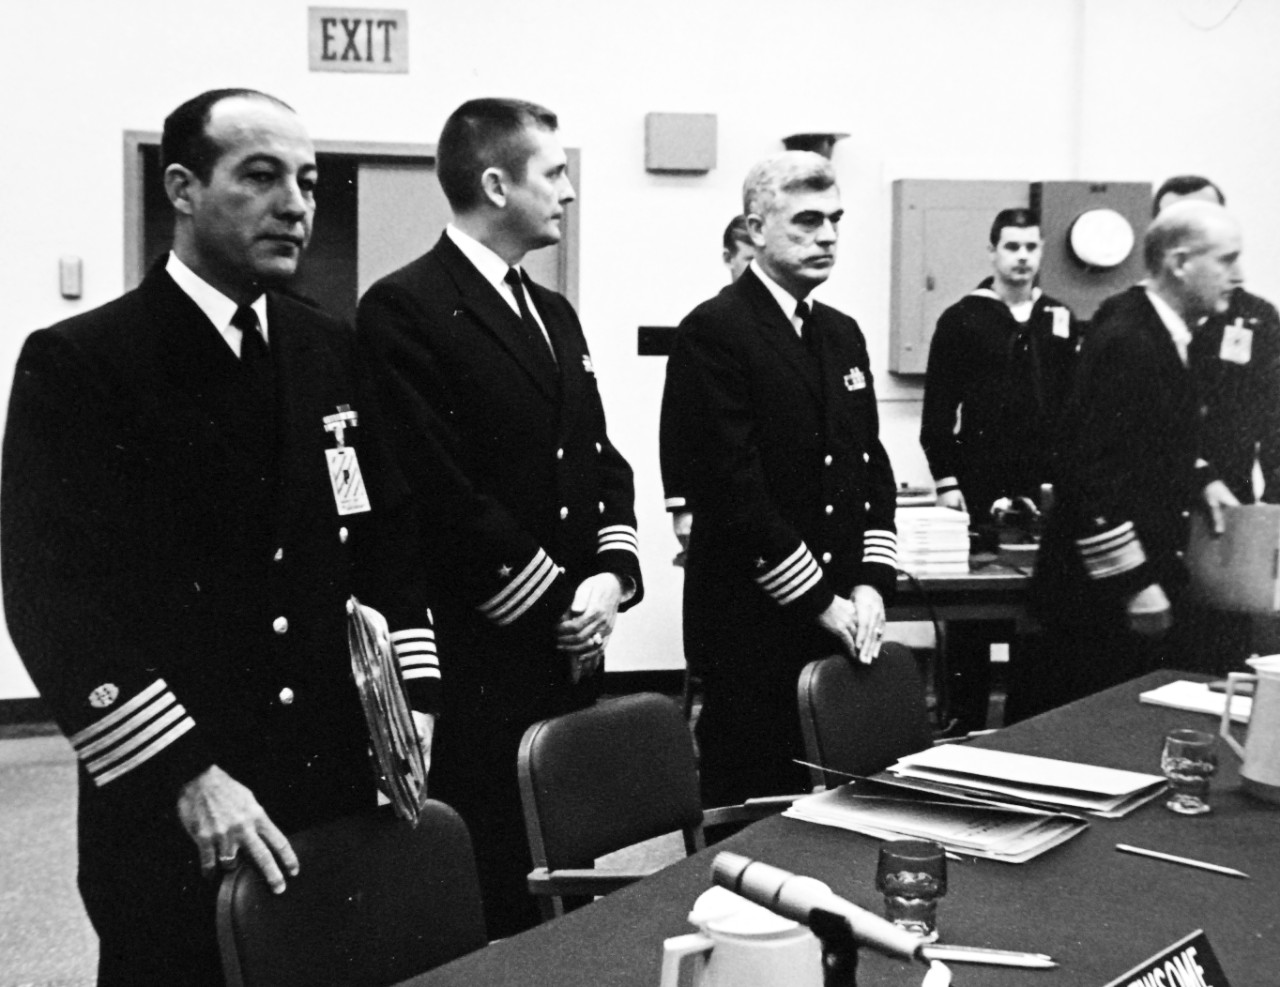 428-GX-USN-1140165:  U.S. Naval Station, San Diego, January 24, 1969.  Naval Officers prepare for closed session of the Court of Inquiry on the capture of the USS Pueblo (AGER-2).  From left, Captain William R. Newsome, Counsel for the Court; Commander Richard W. Bates; Captain Roger M. Barr, Representative of the Navy Department, Washington, D.C.; and Vice Admiral Harold G. Bowen, Jr., President of the Court.   Photographed by AN Nord Petersen.  Official U.S. Navy Photograph, now in the collections of the National Archives (2017/05/23).  Photographed from reference card. 